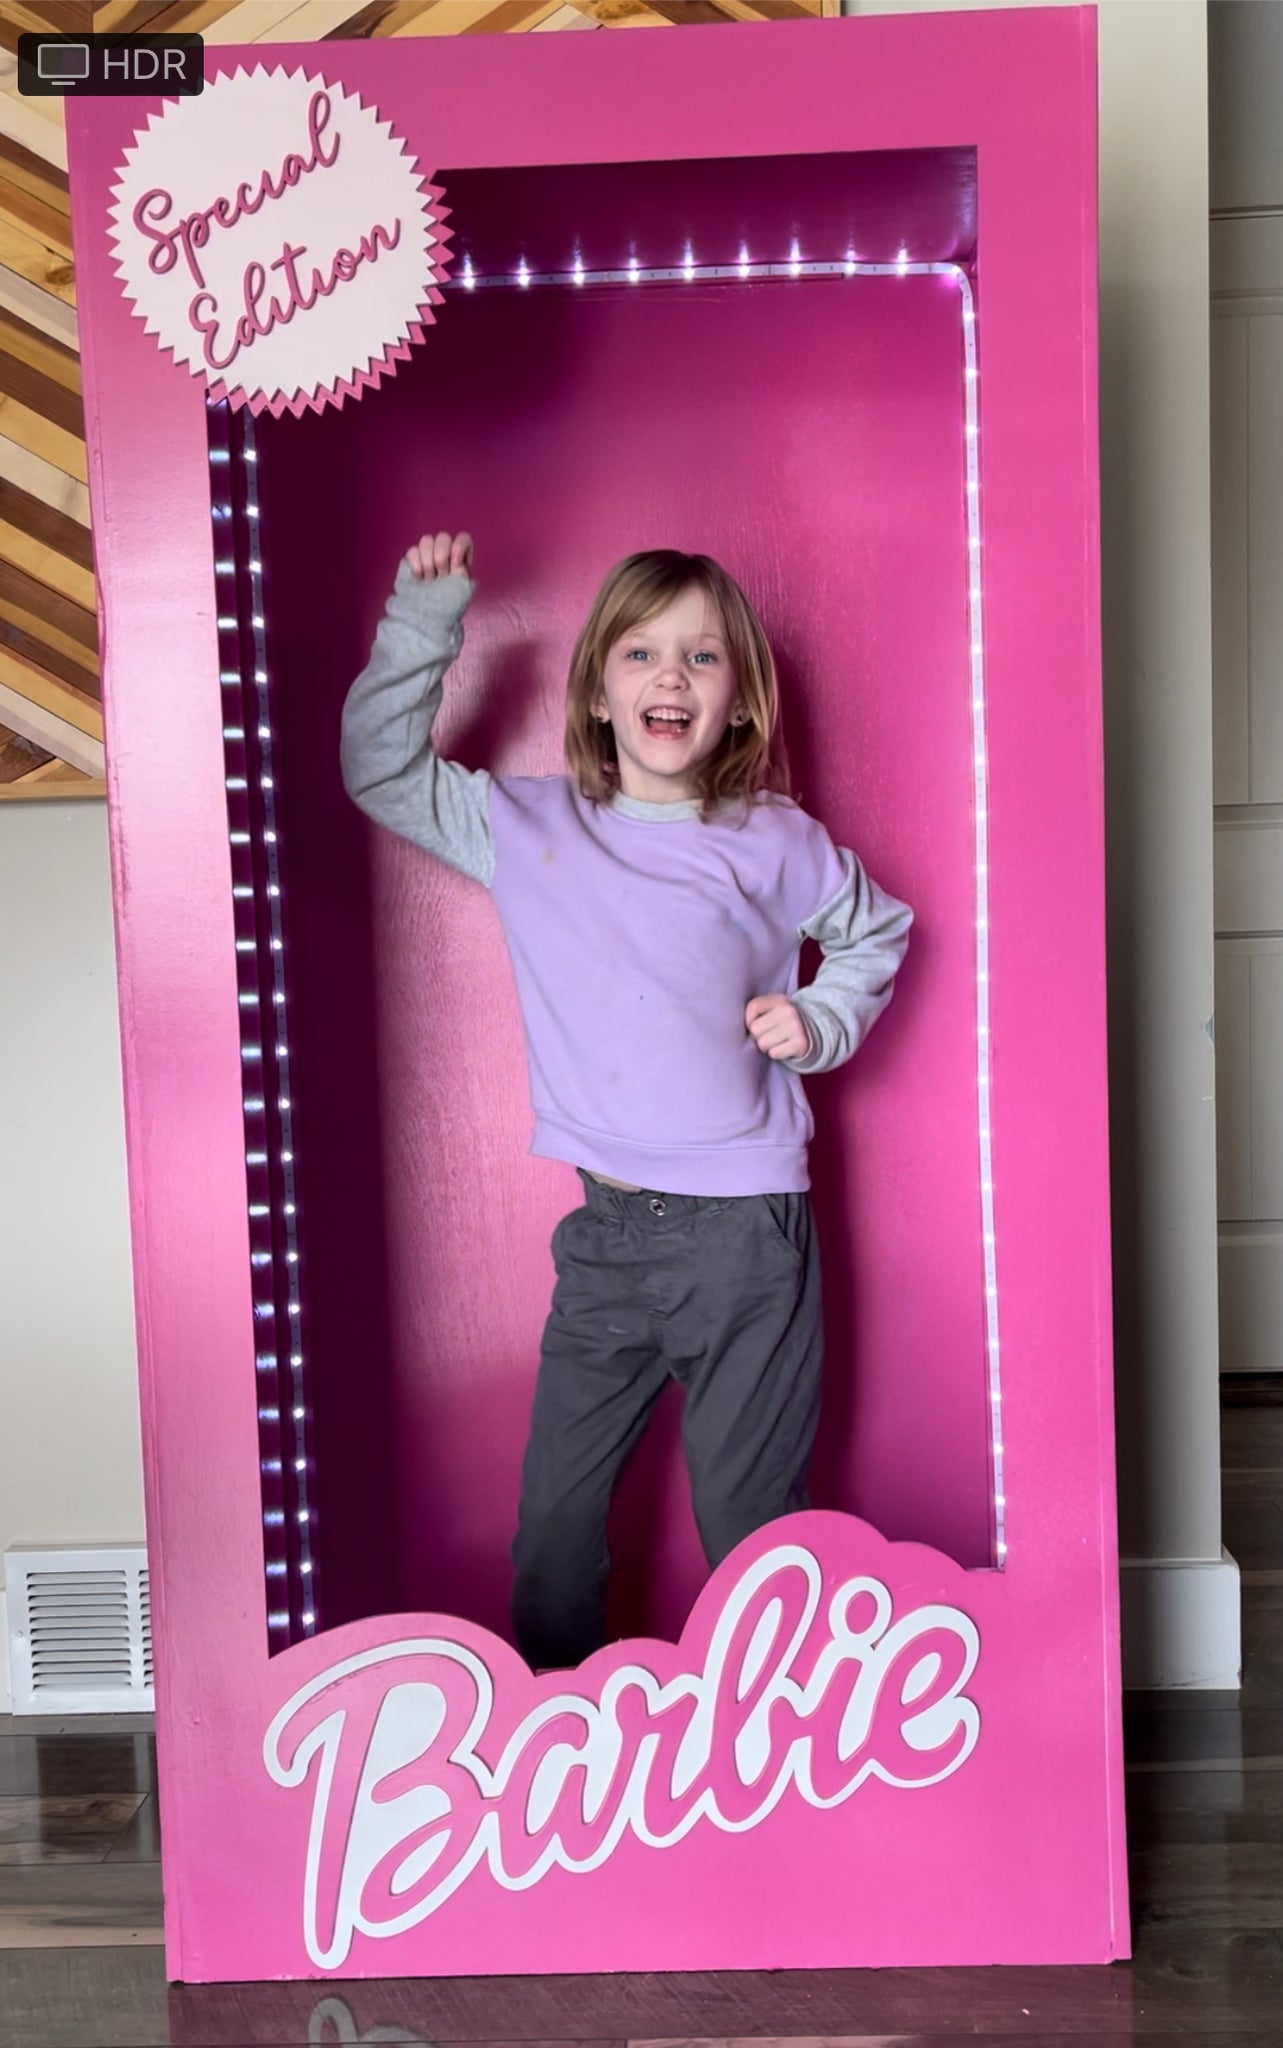 Barbie Box Adult Size Rental – Made From Holm